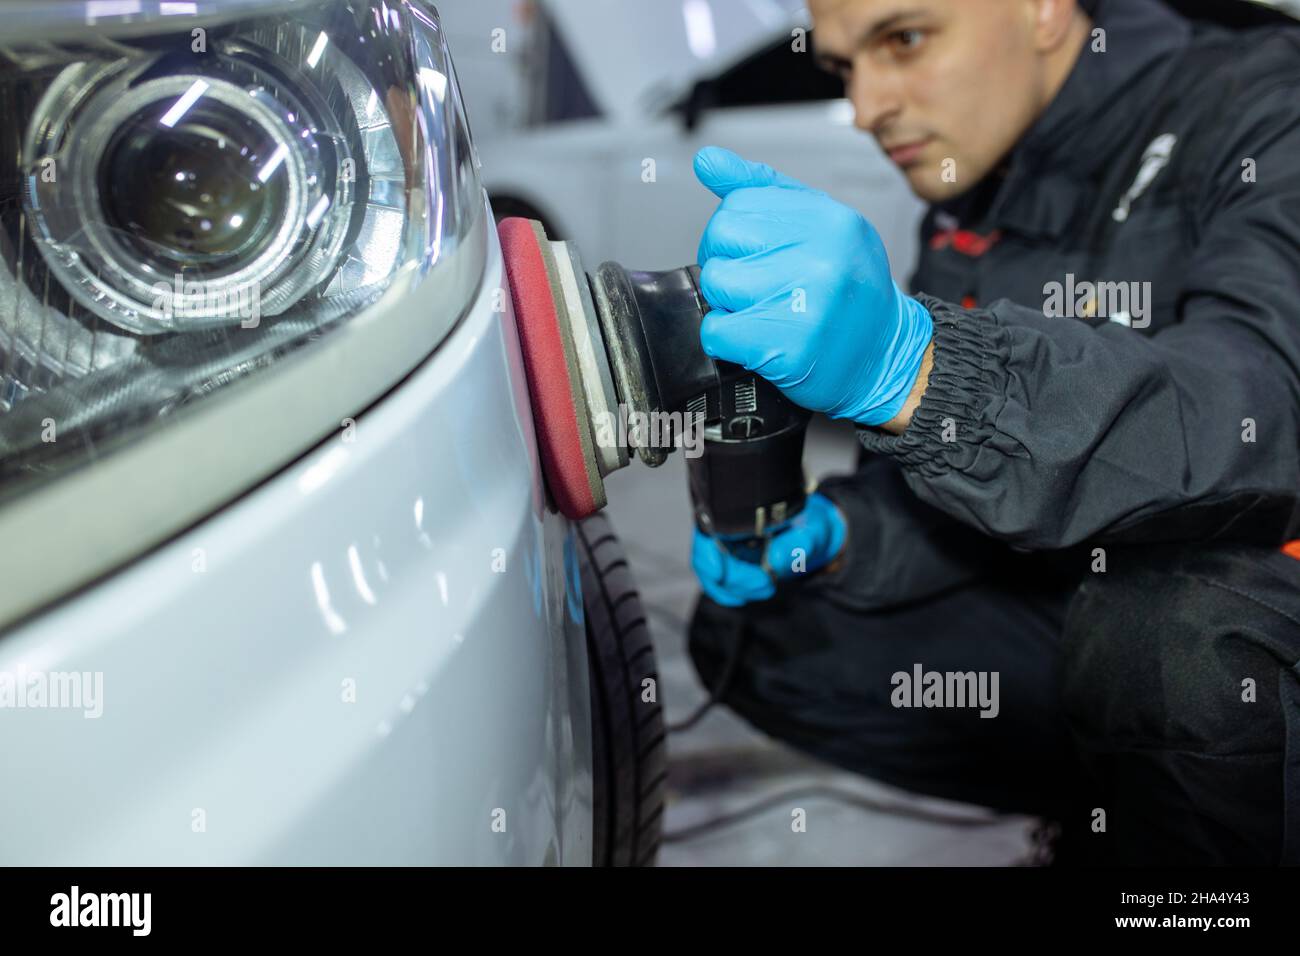 Serviceman polishing car body with machine in a workshop. Stock Photo